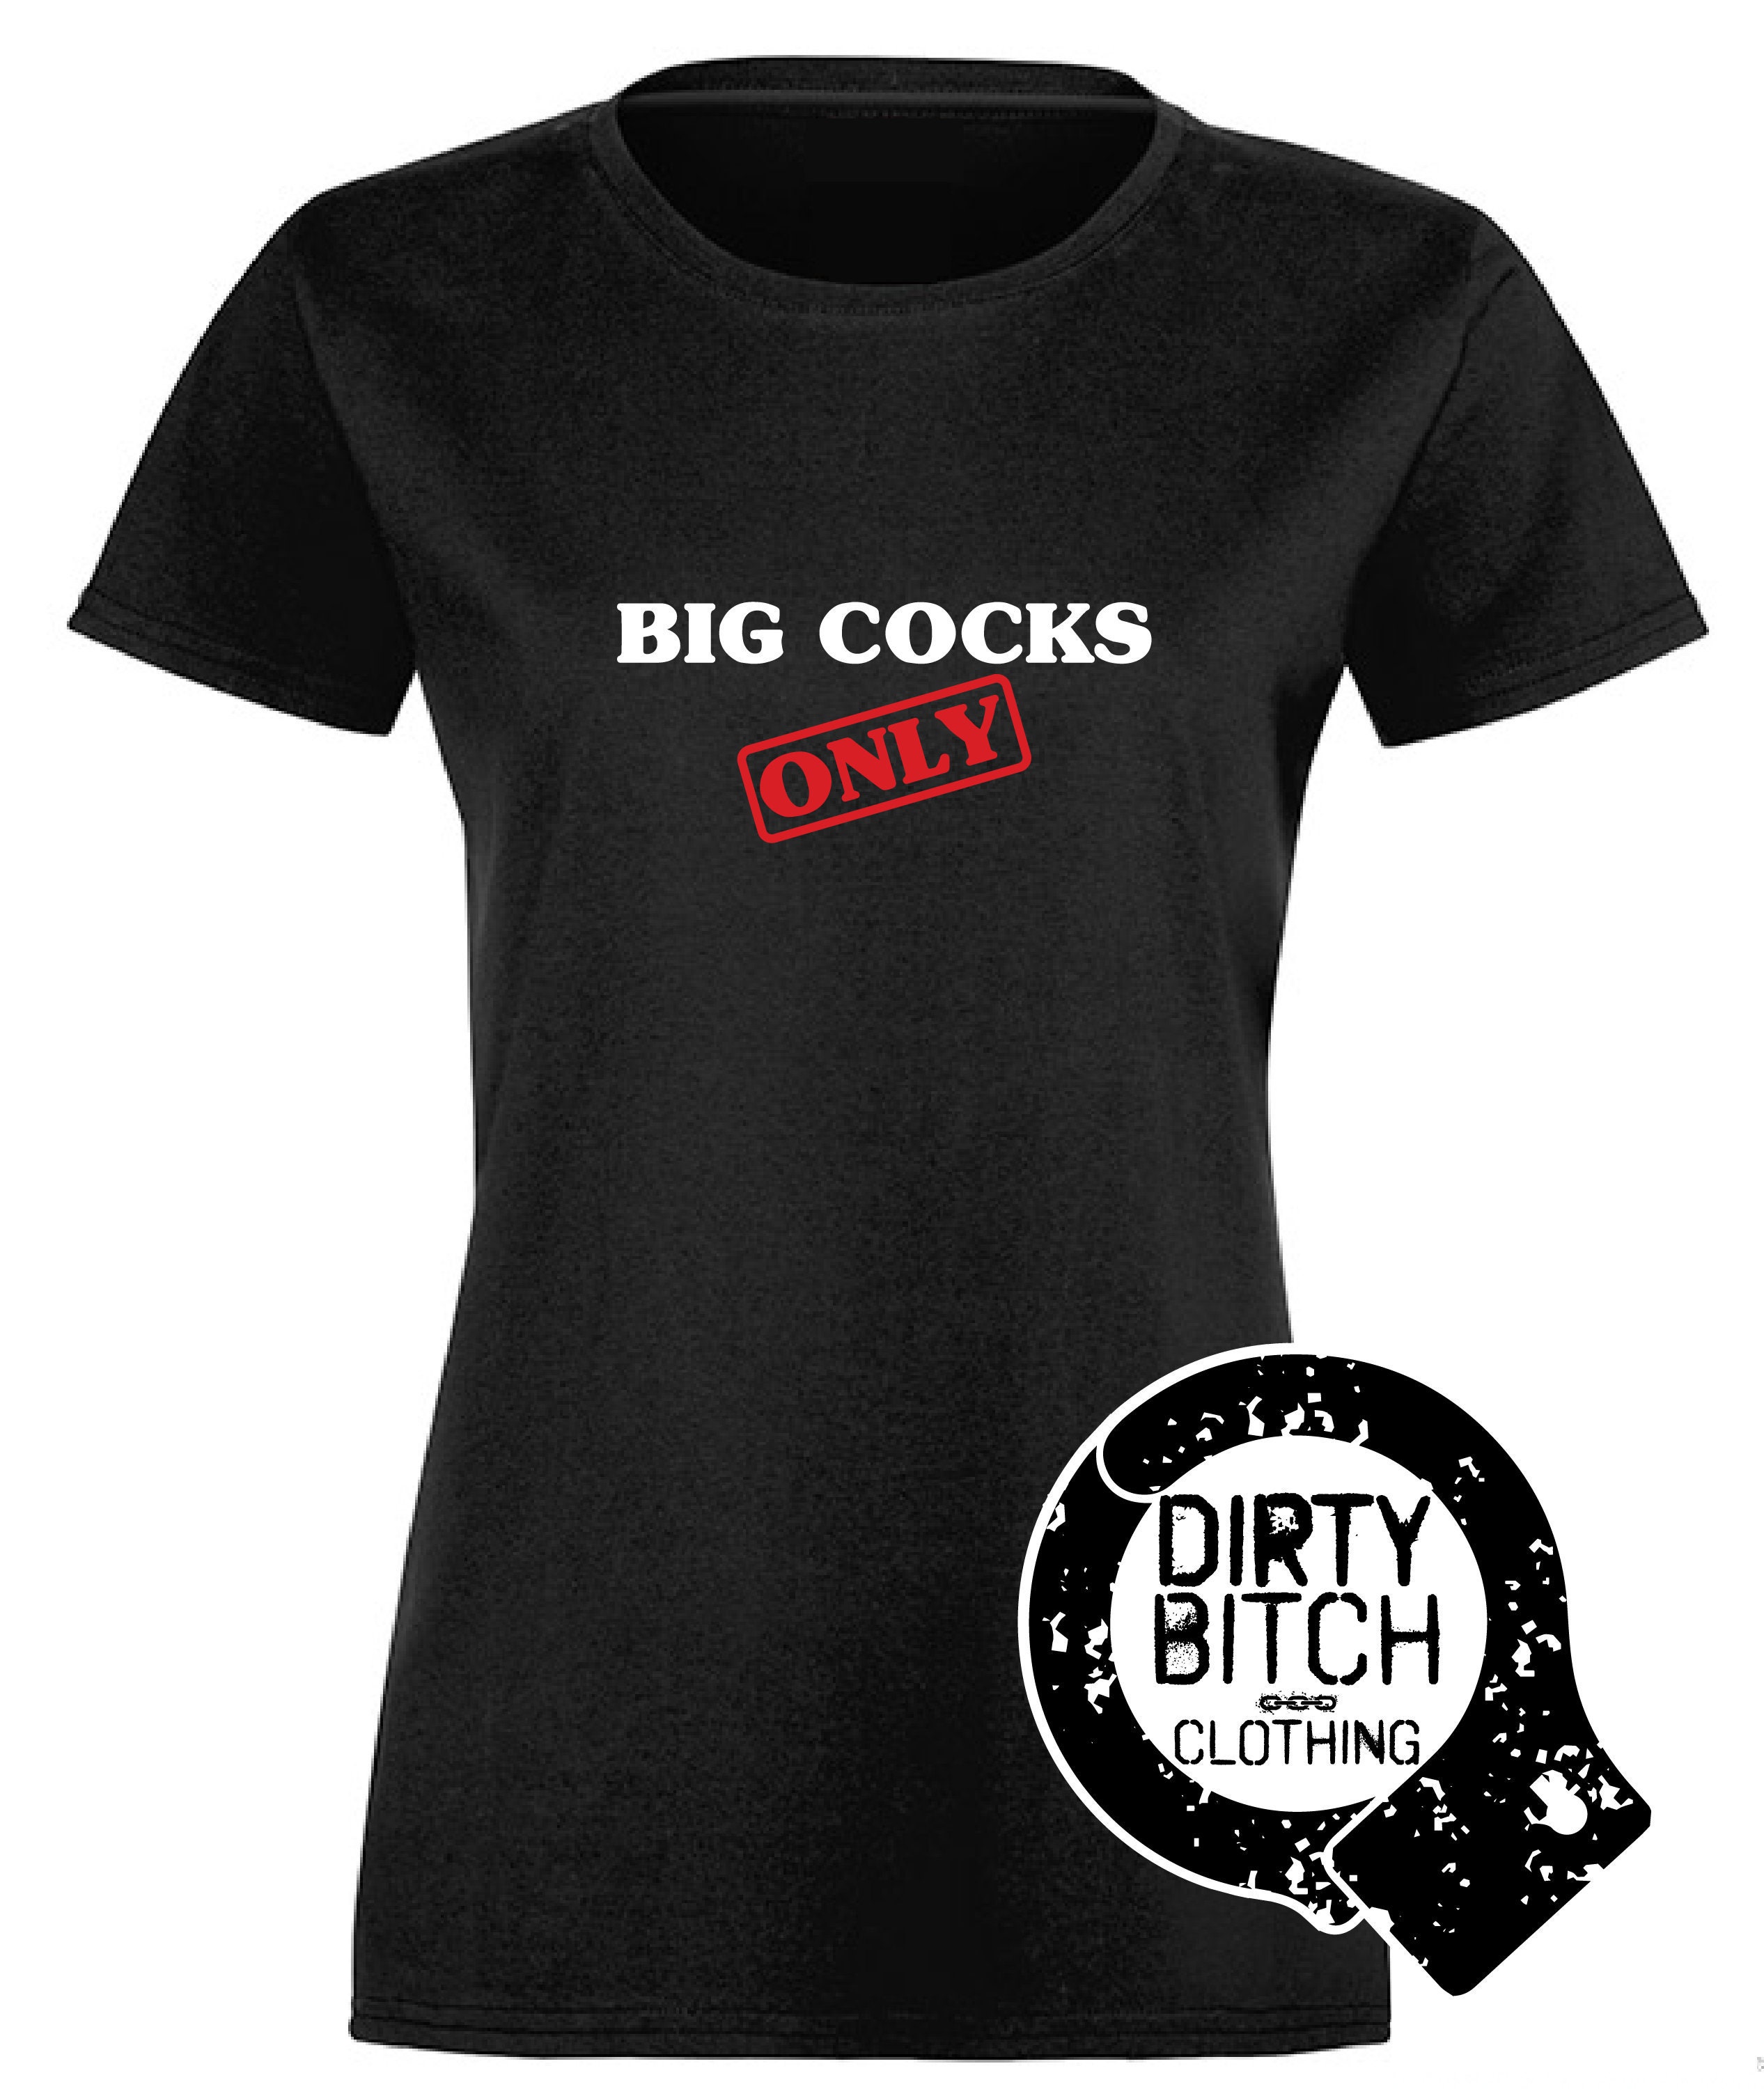 Big Cocks Only Adult T-shirt Clothing Boobs Hotwife image